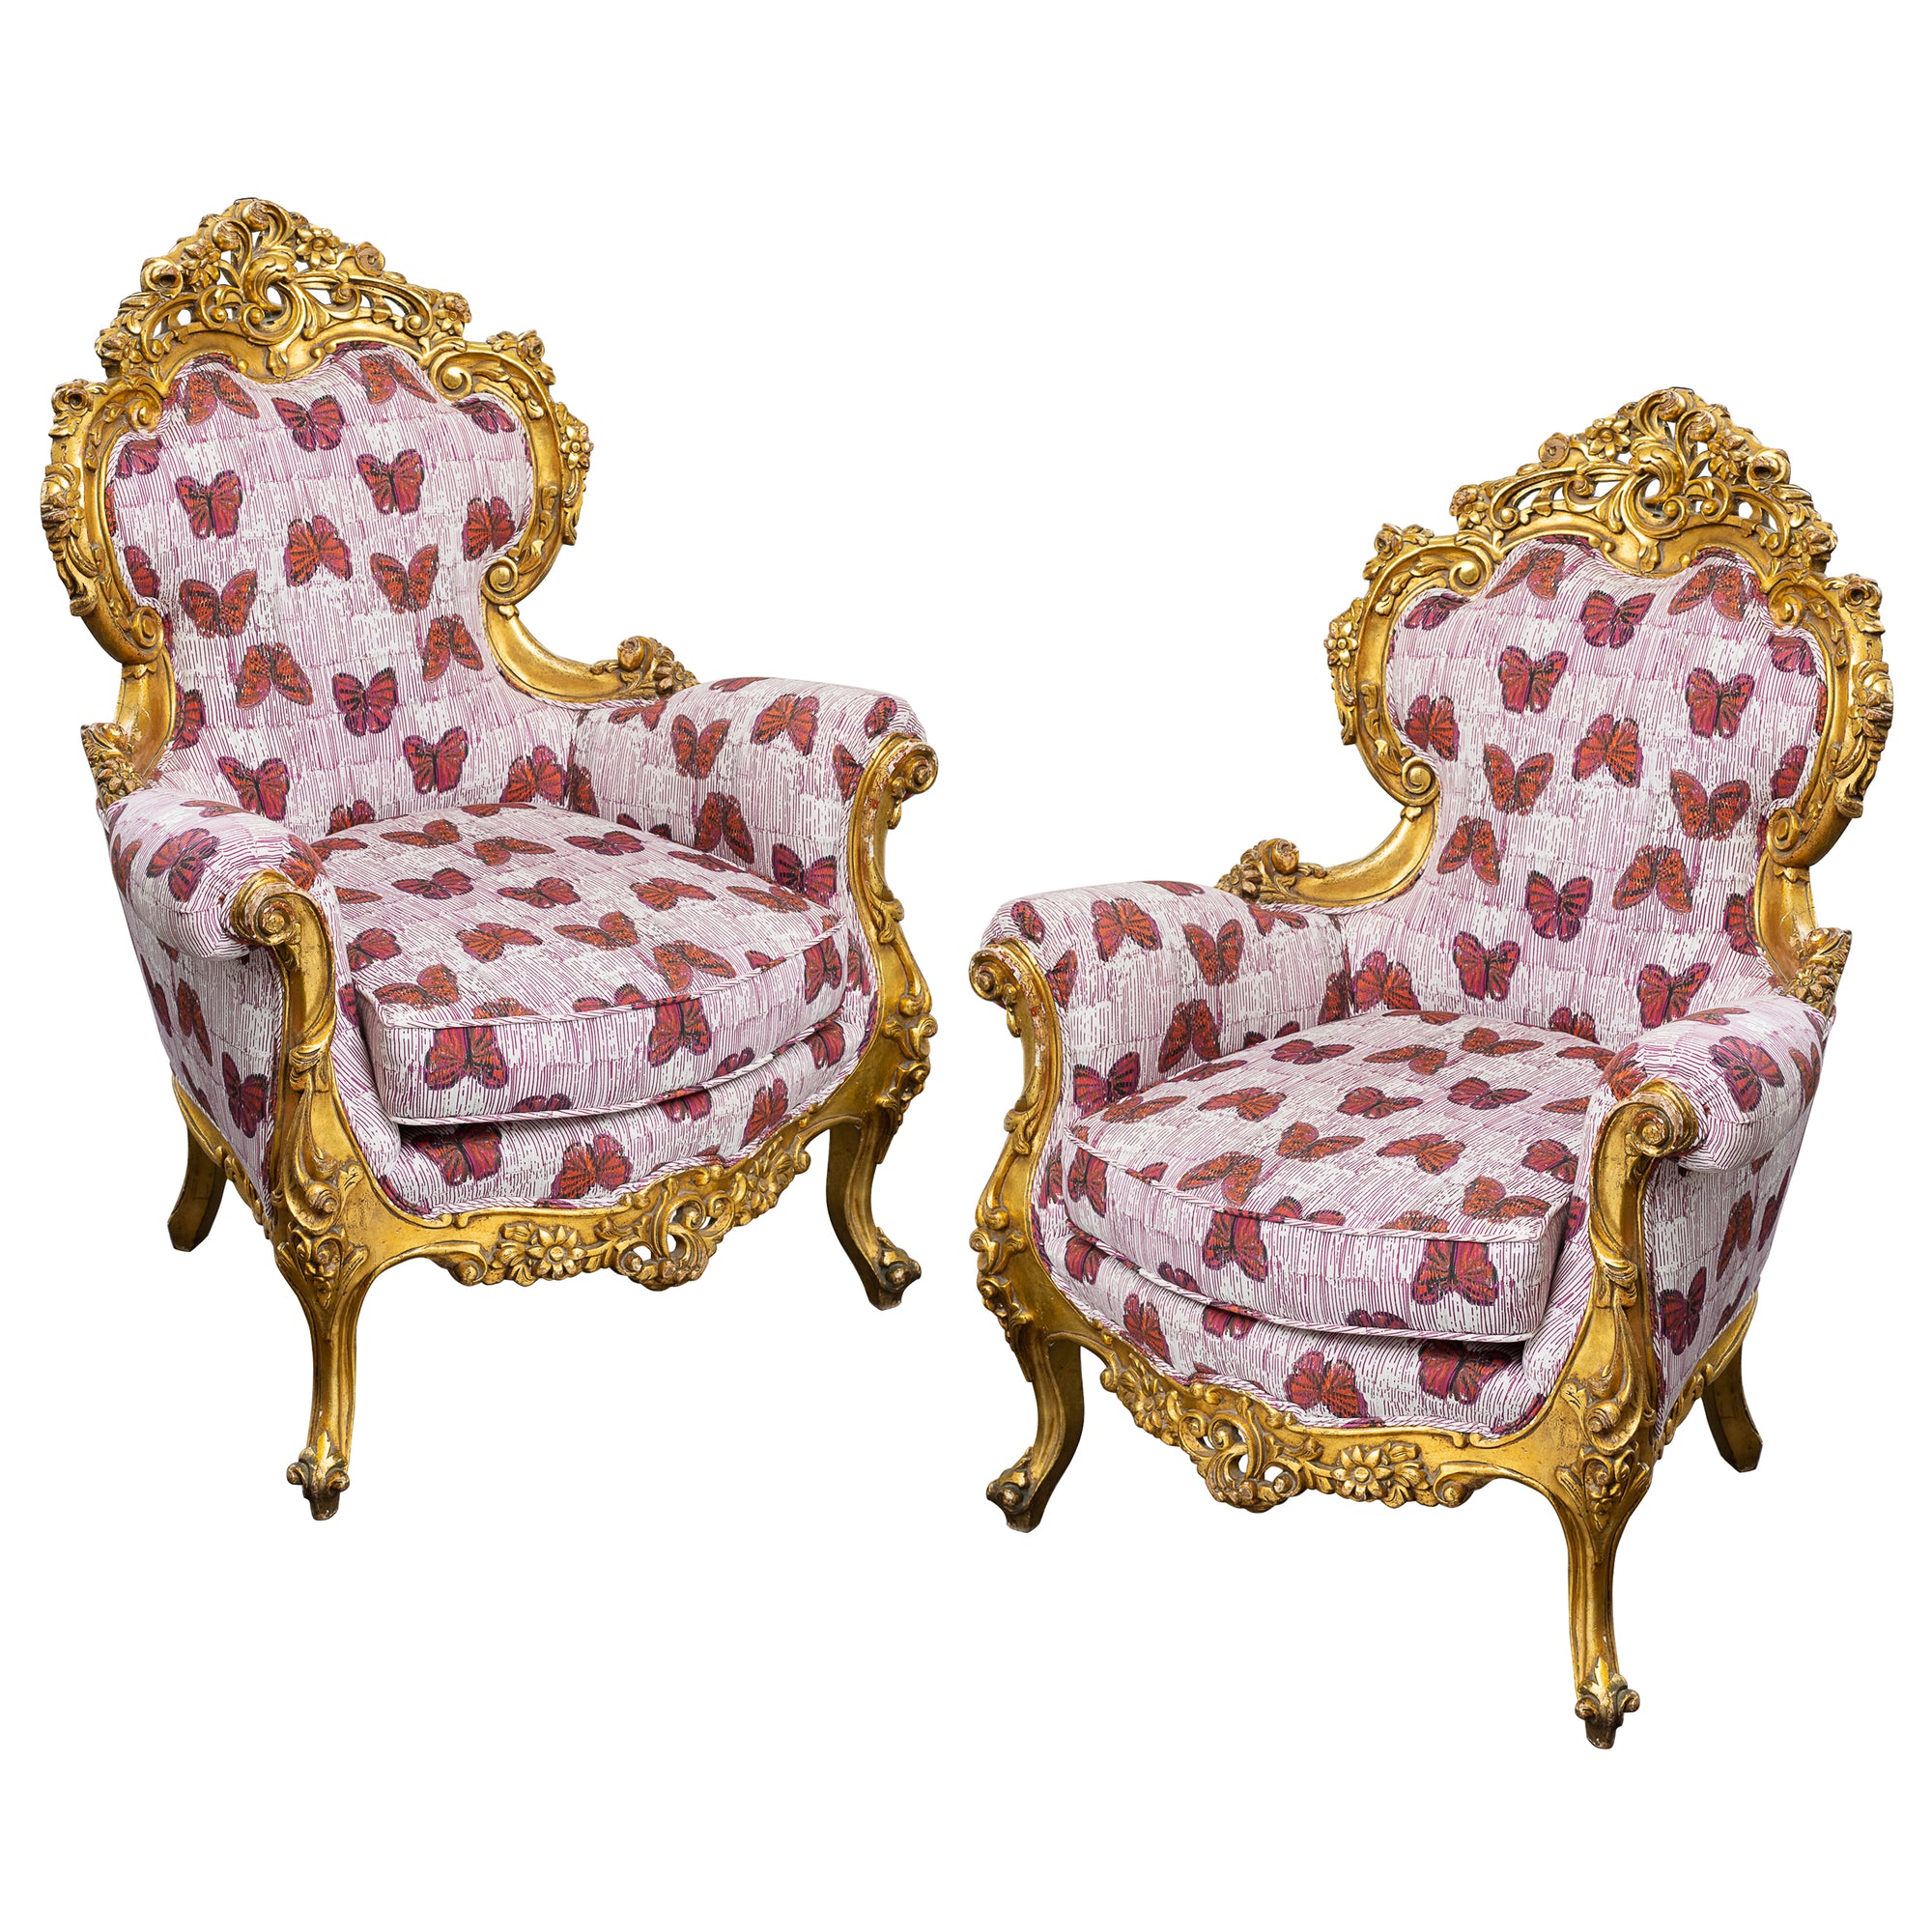 19th Century French Louis XV Bergere Arm Chair in a Fine Floral Uphols